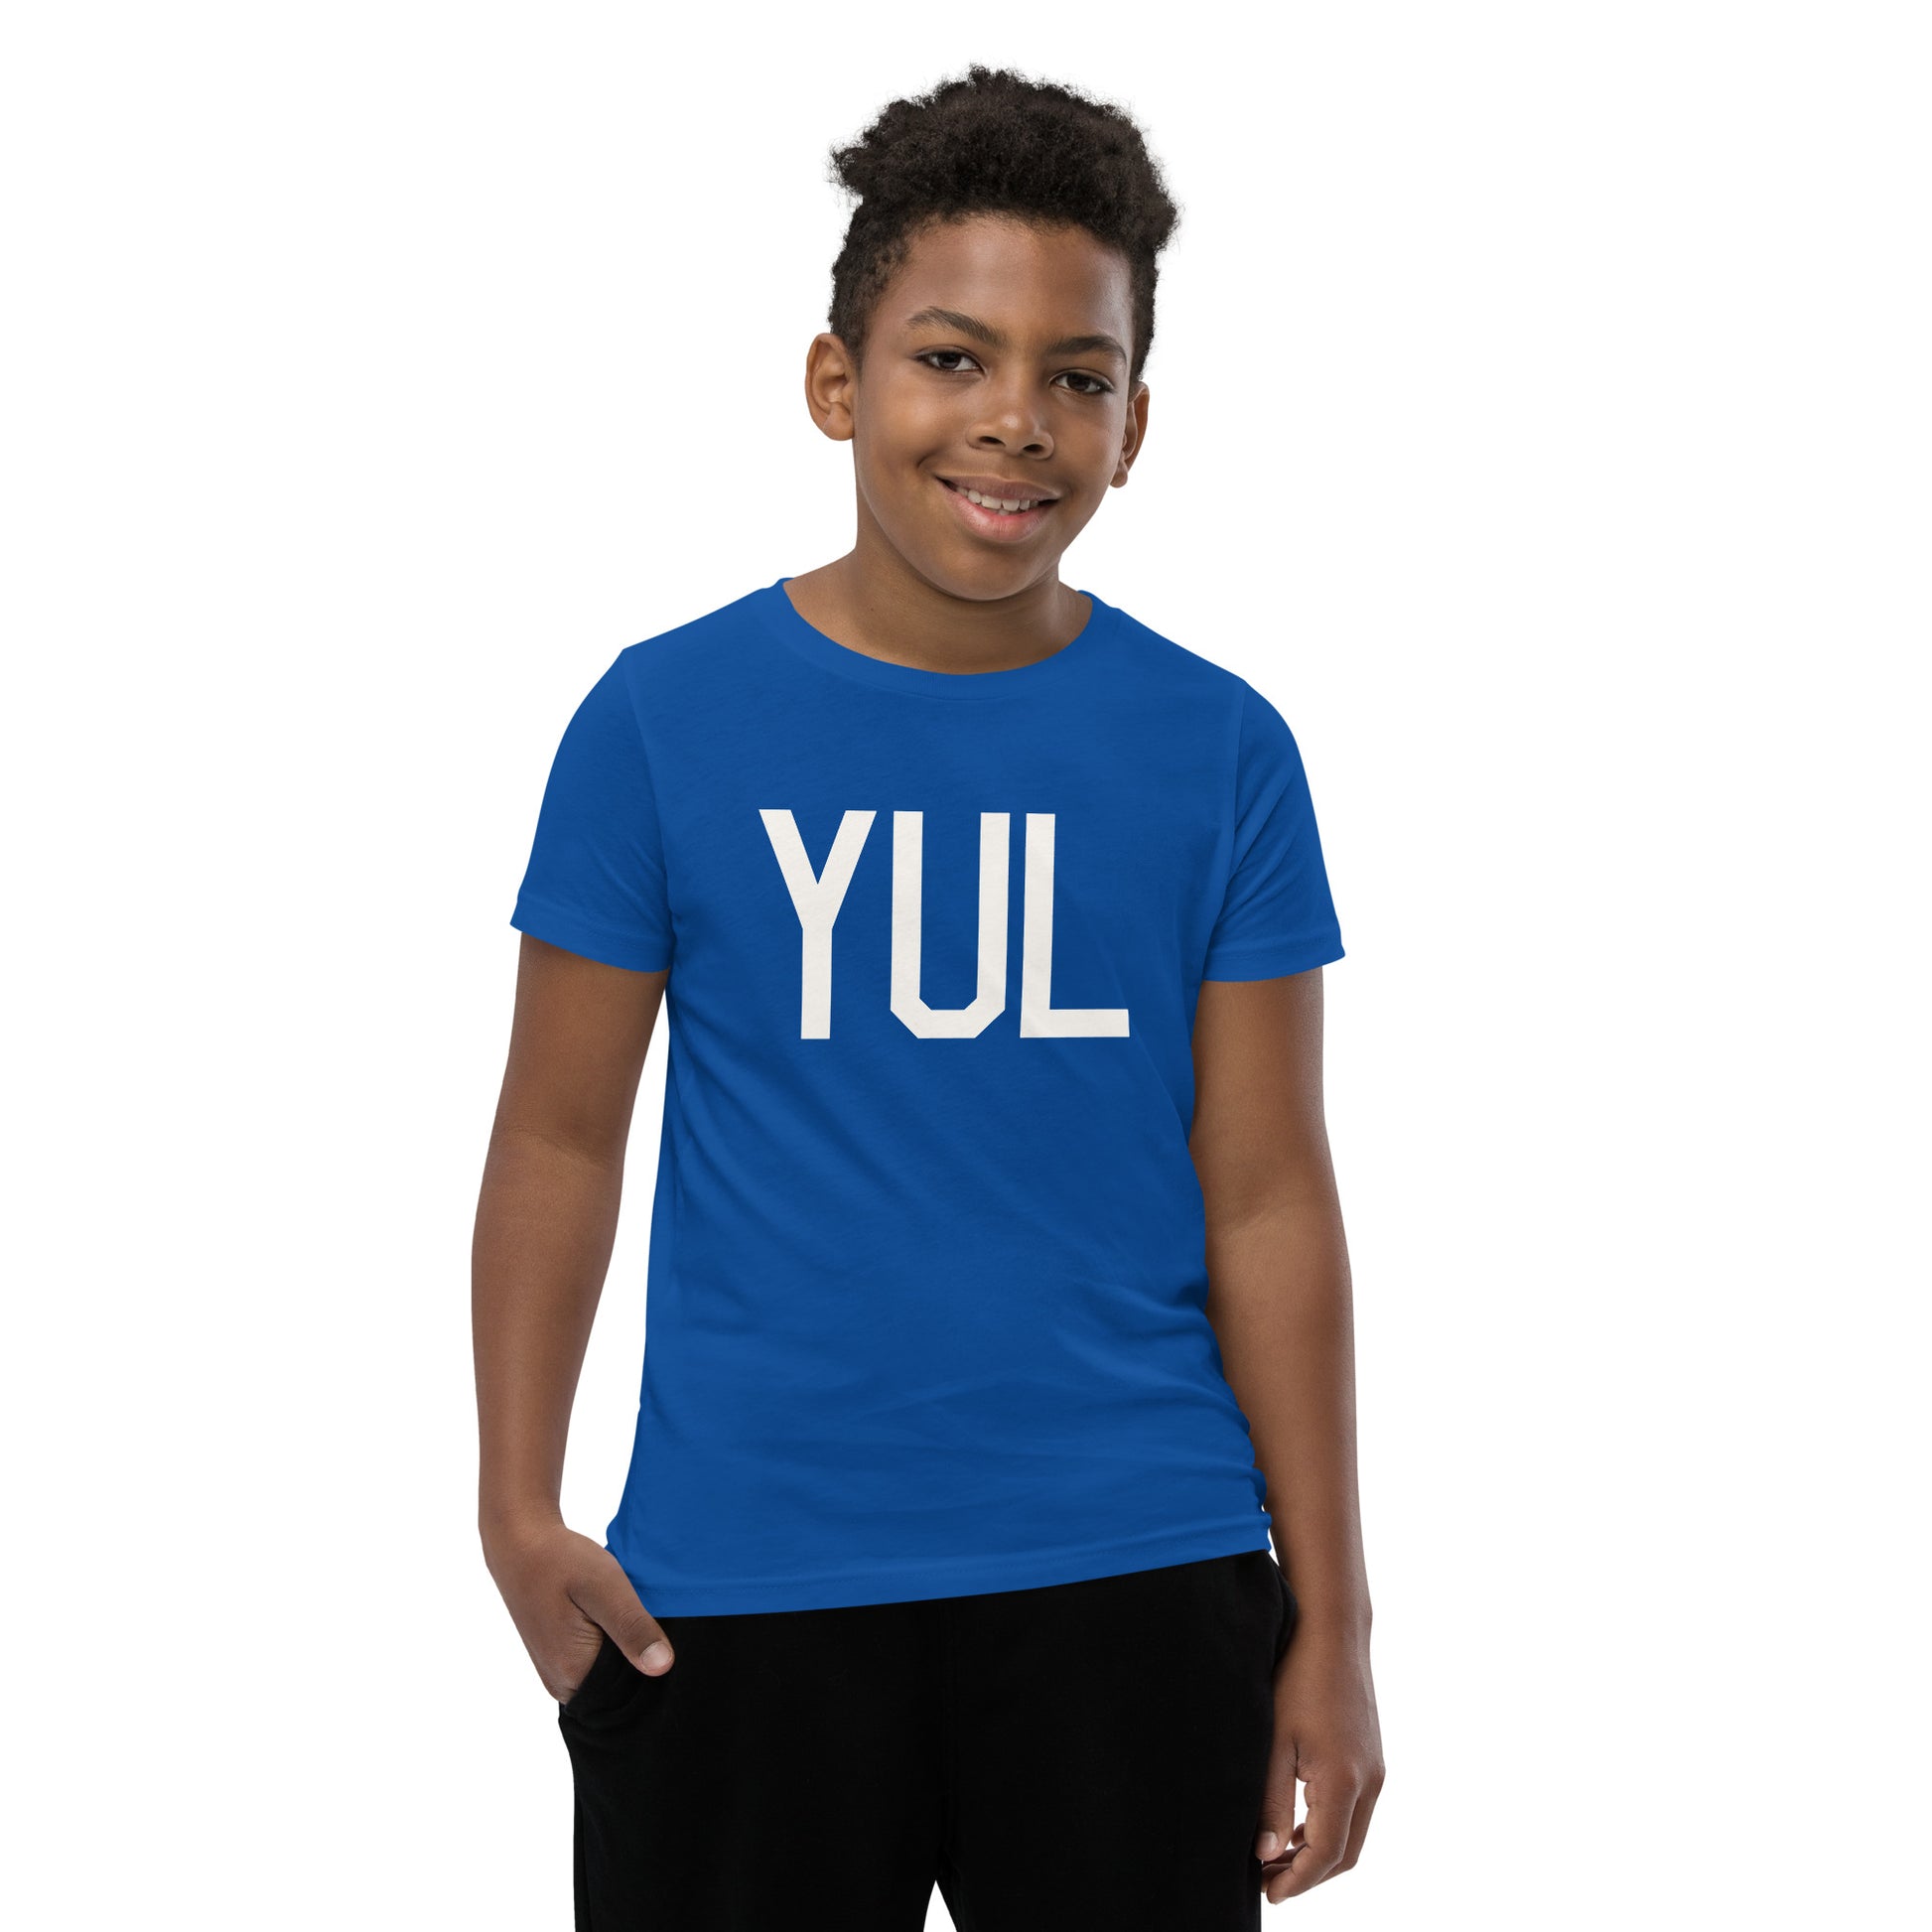 Kid's T-Shirt - White Graphic • YUL Montreal • YHM Designs - Image 11